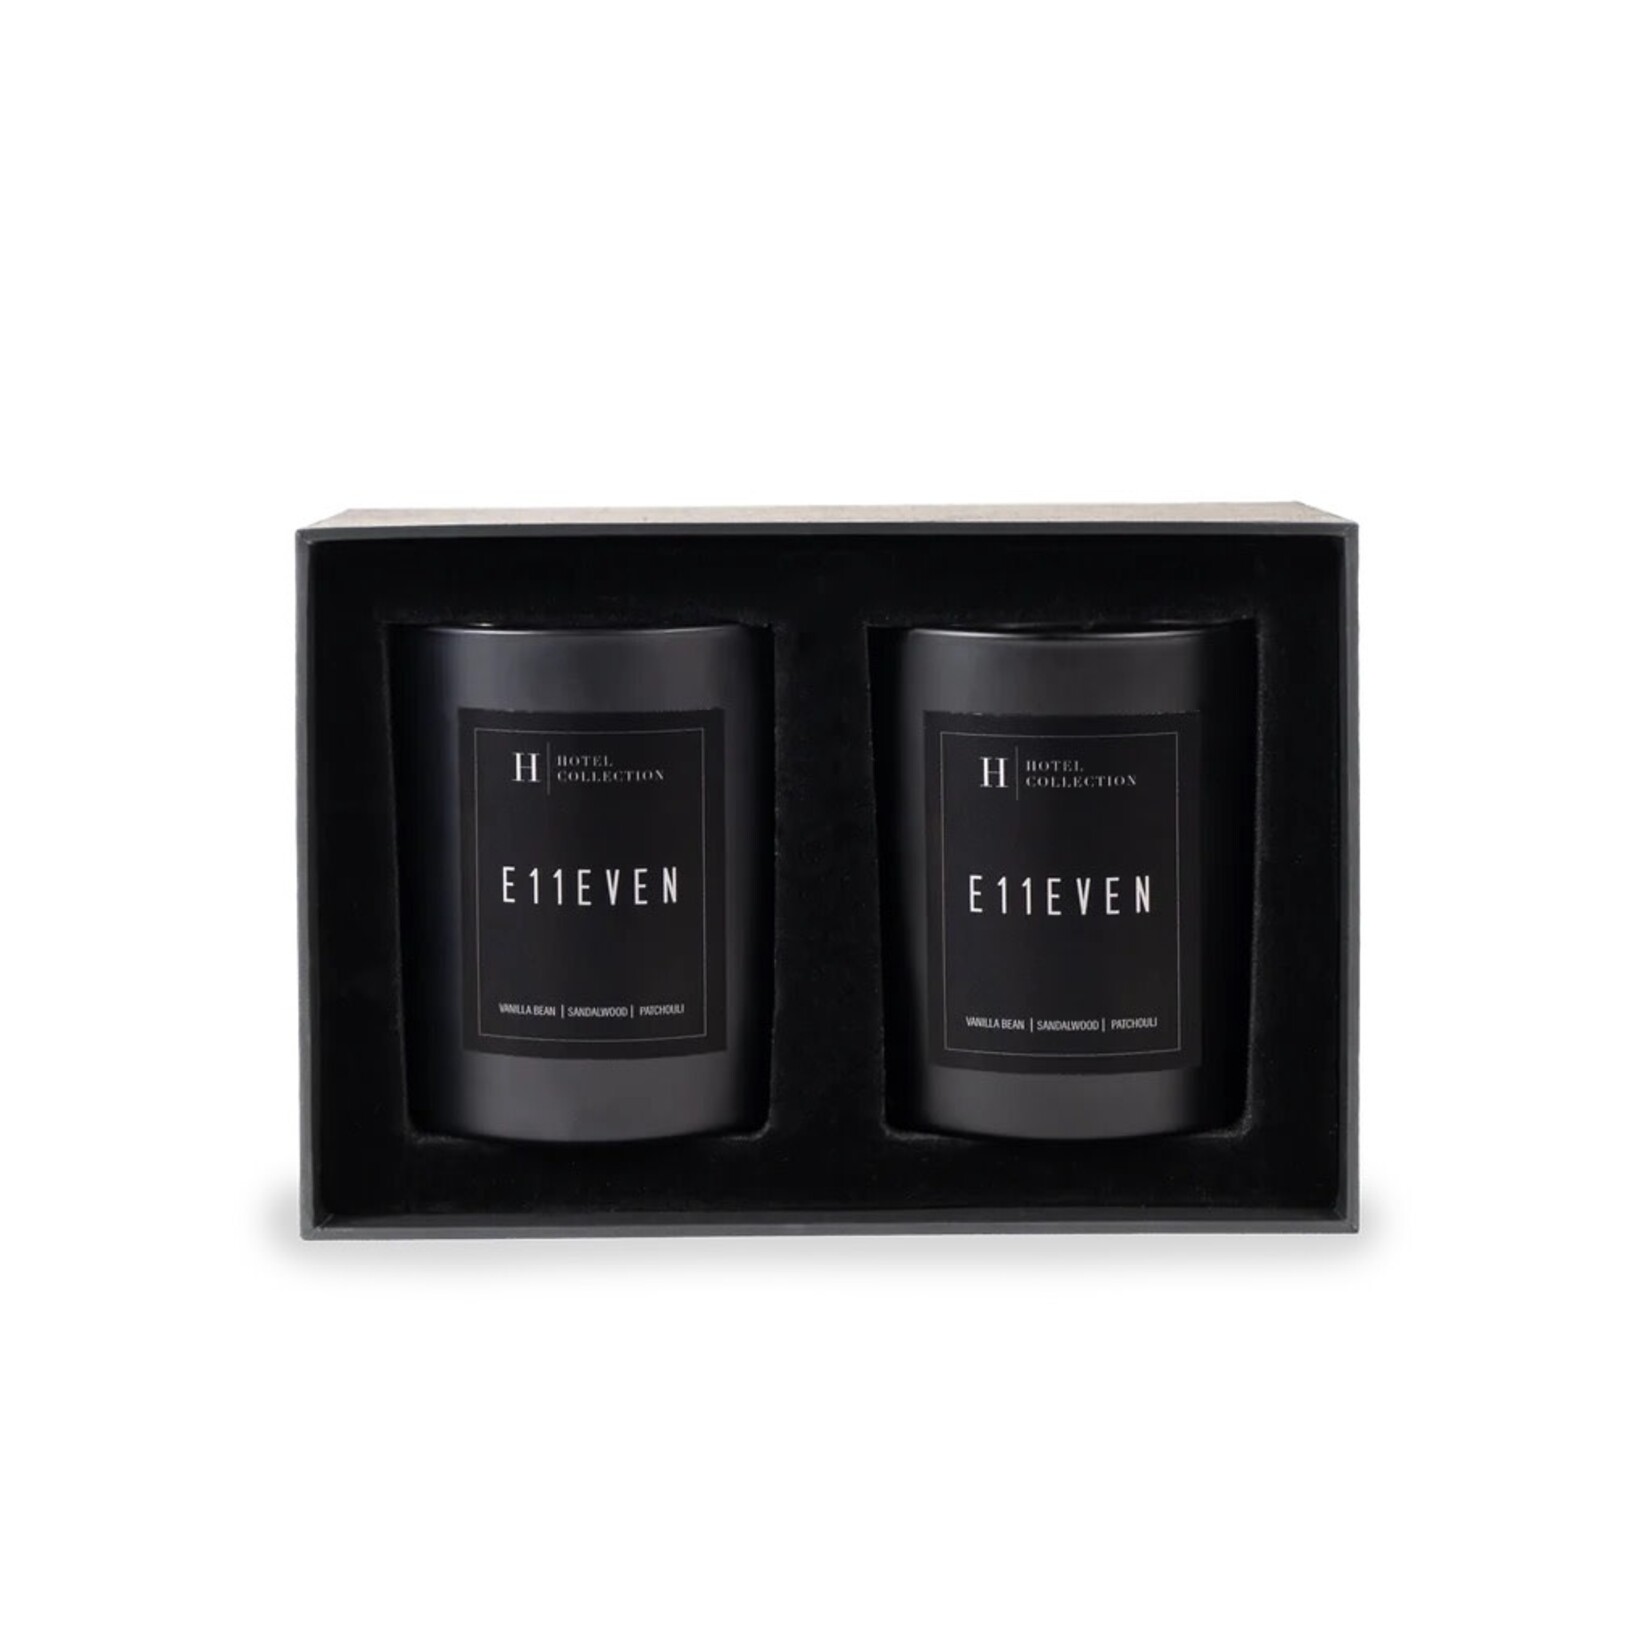 Hotel Collection E11EVEN Candle Duo Set